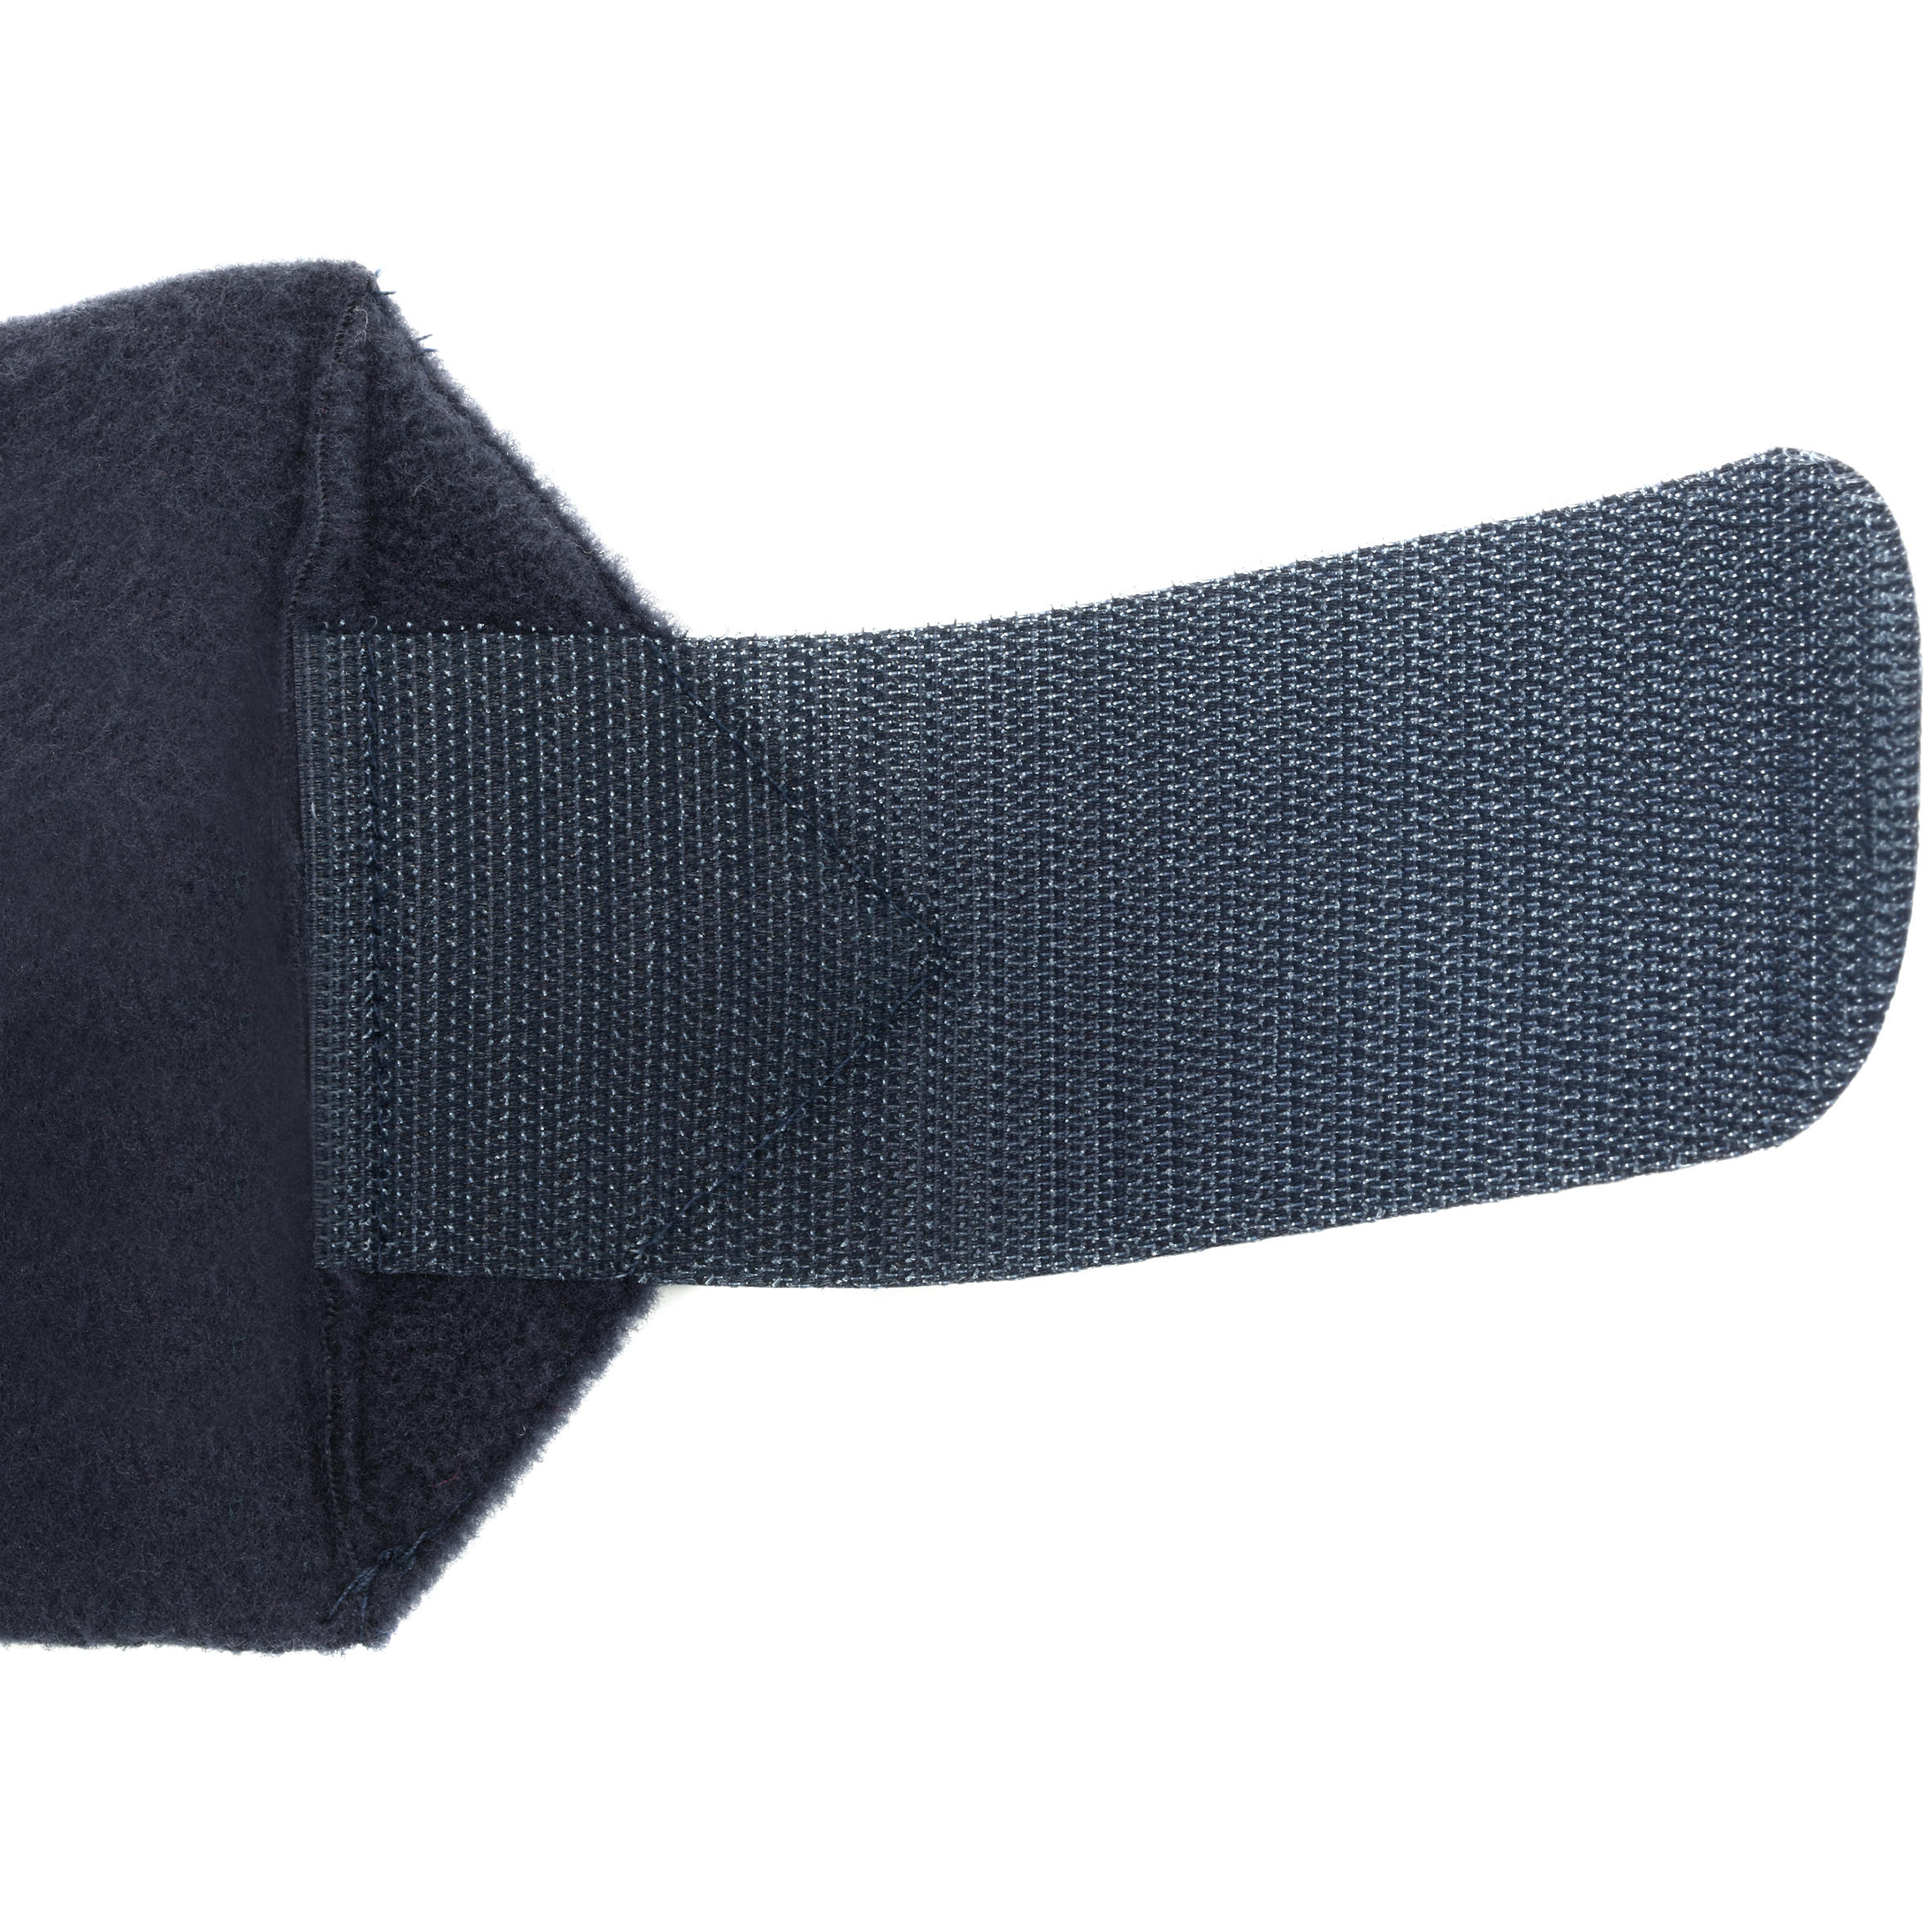 Horse Riding Polo Bandages for Horse 4-Pack - Navy Blue 4/6